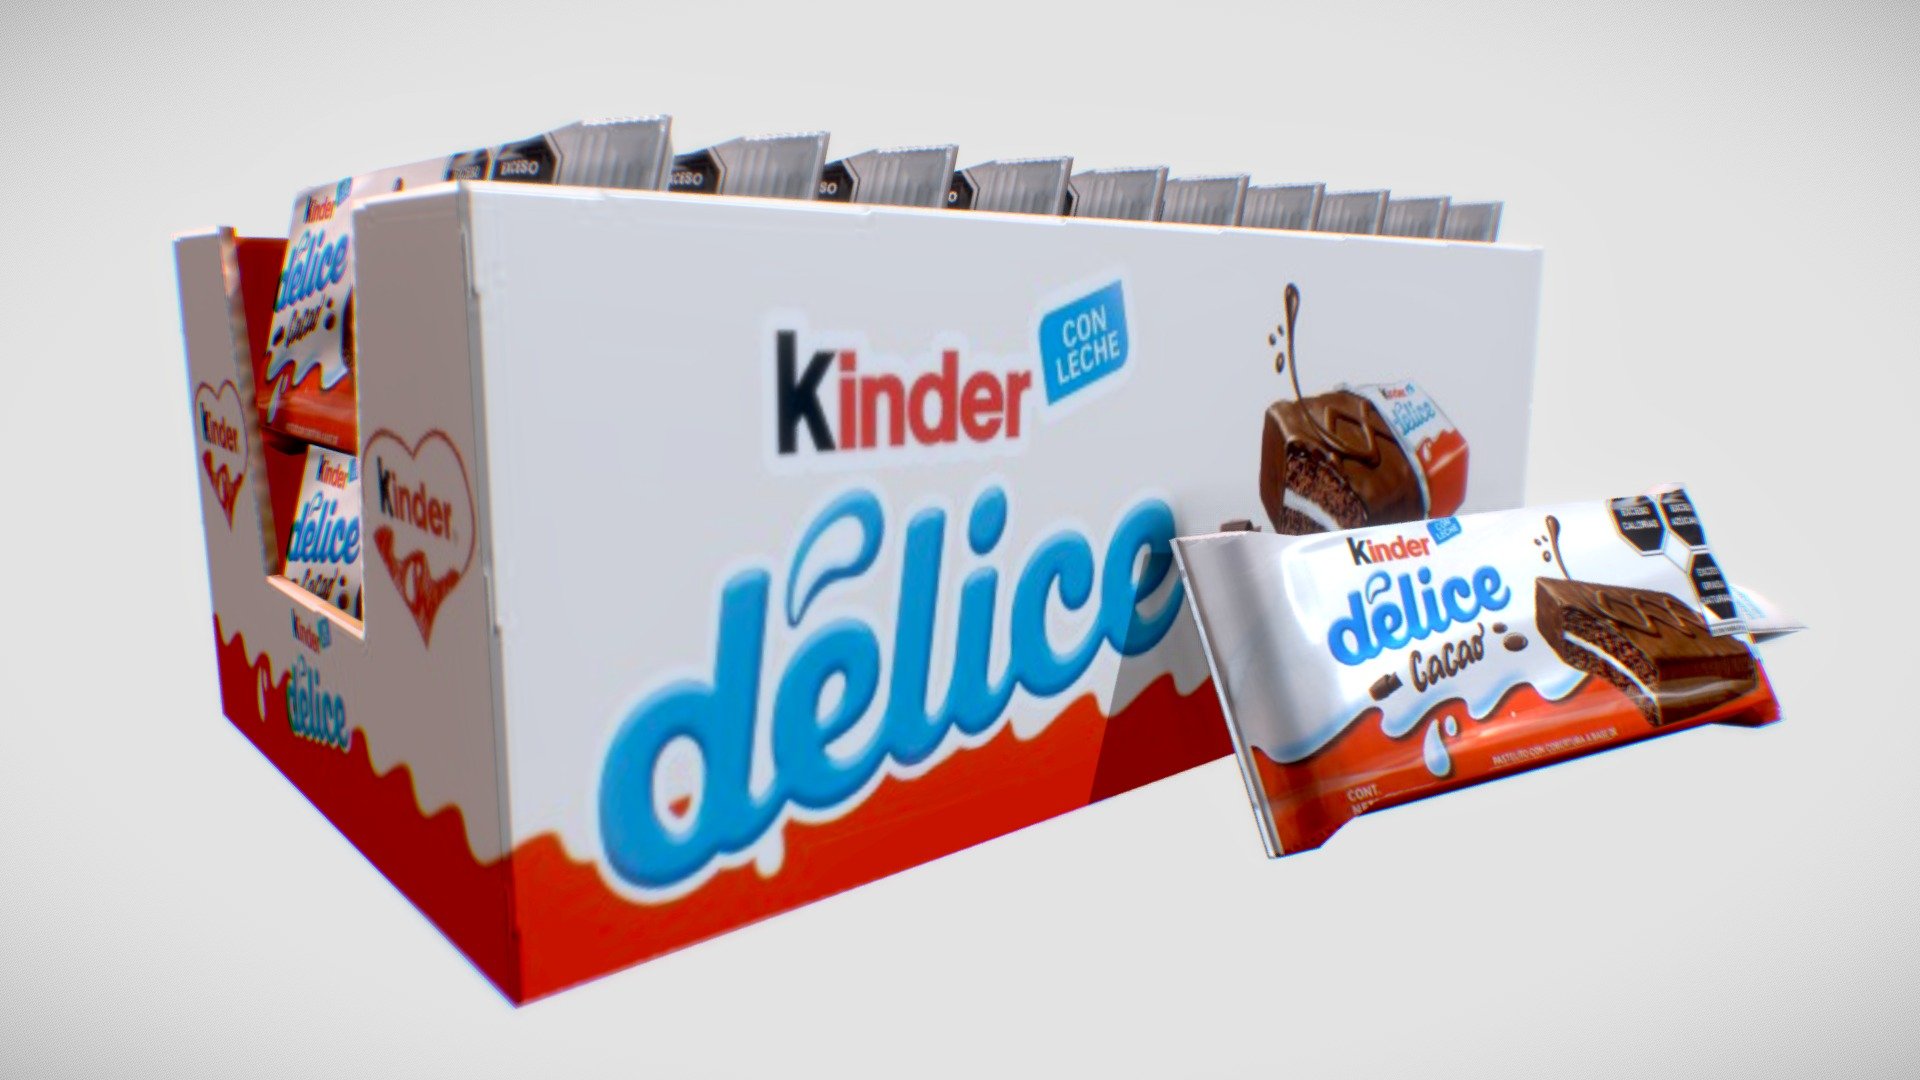 game Ready
low poly realisic model - kinder delice - 3D model by xtremelifestylx 3d model